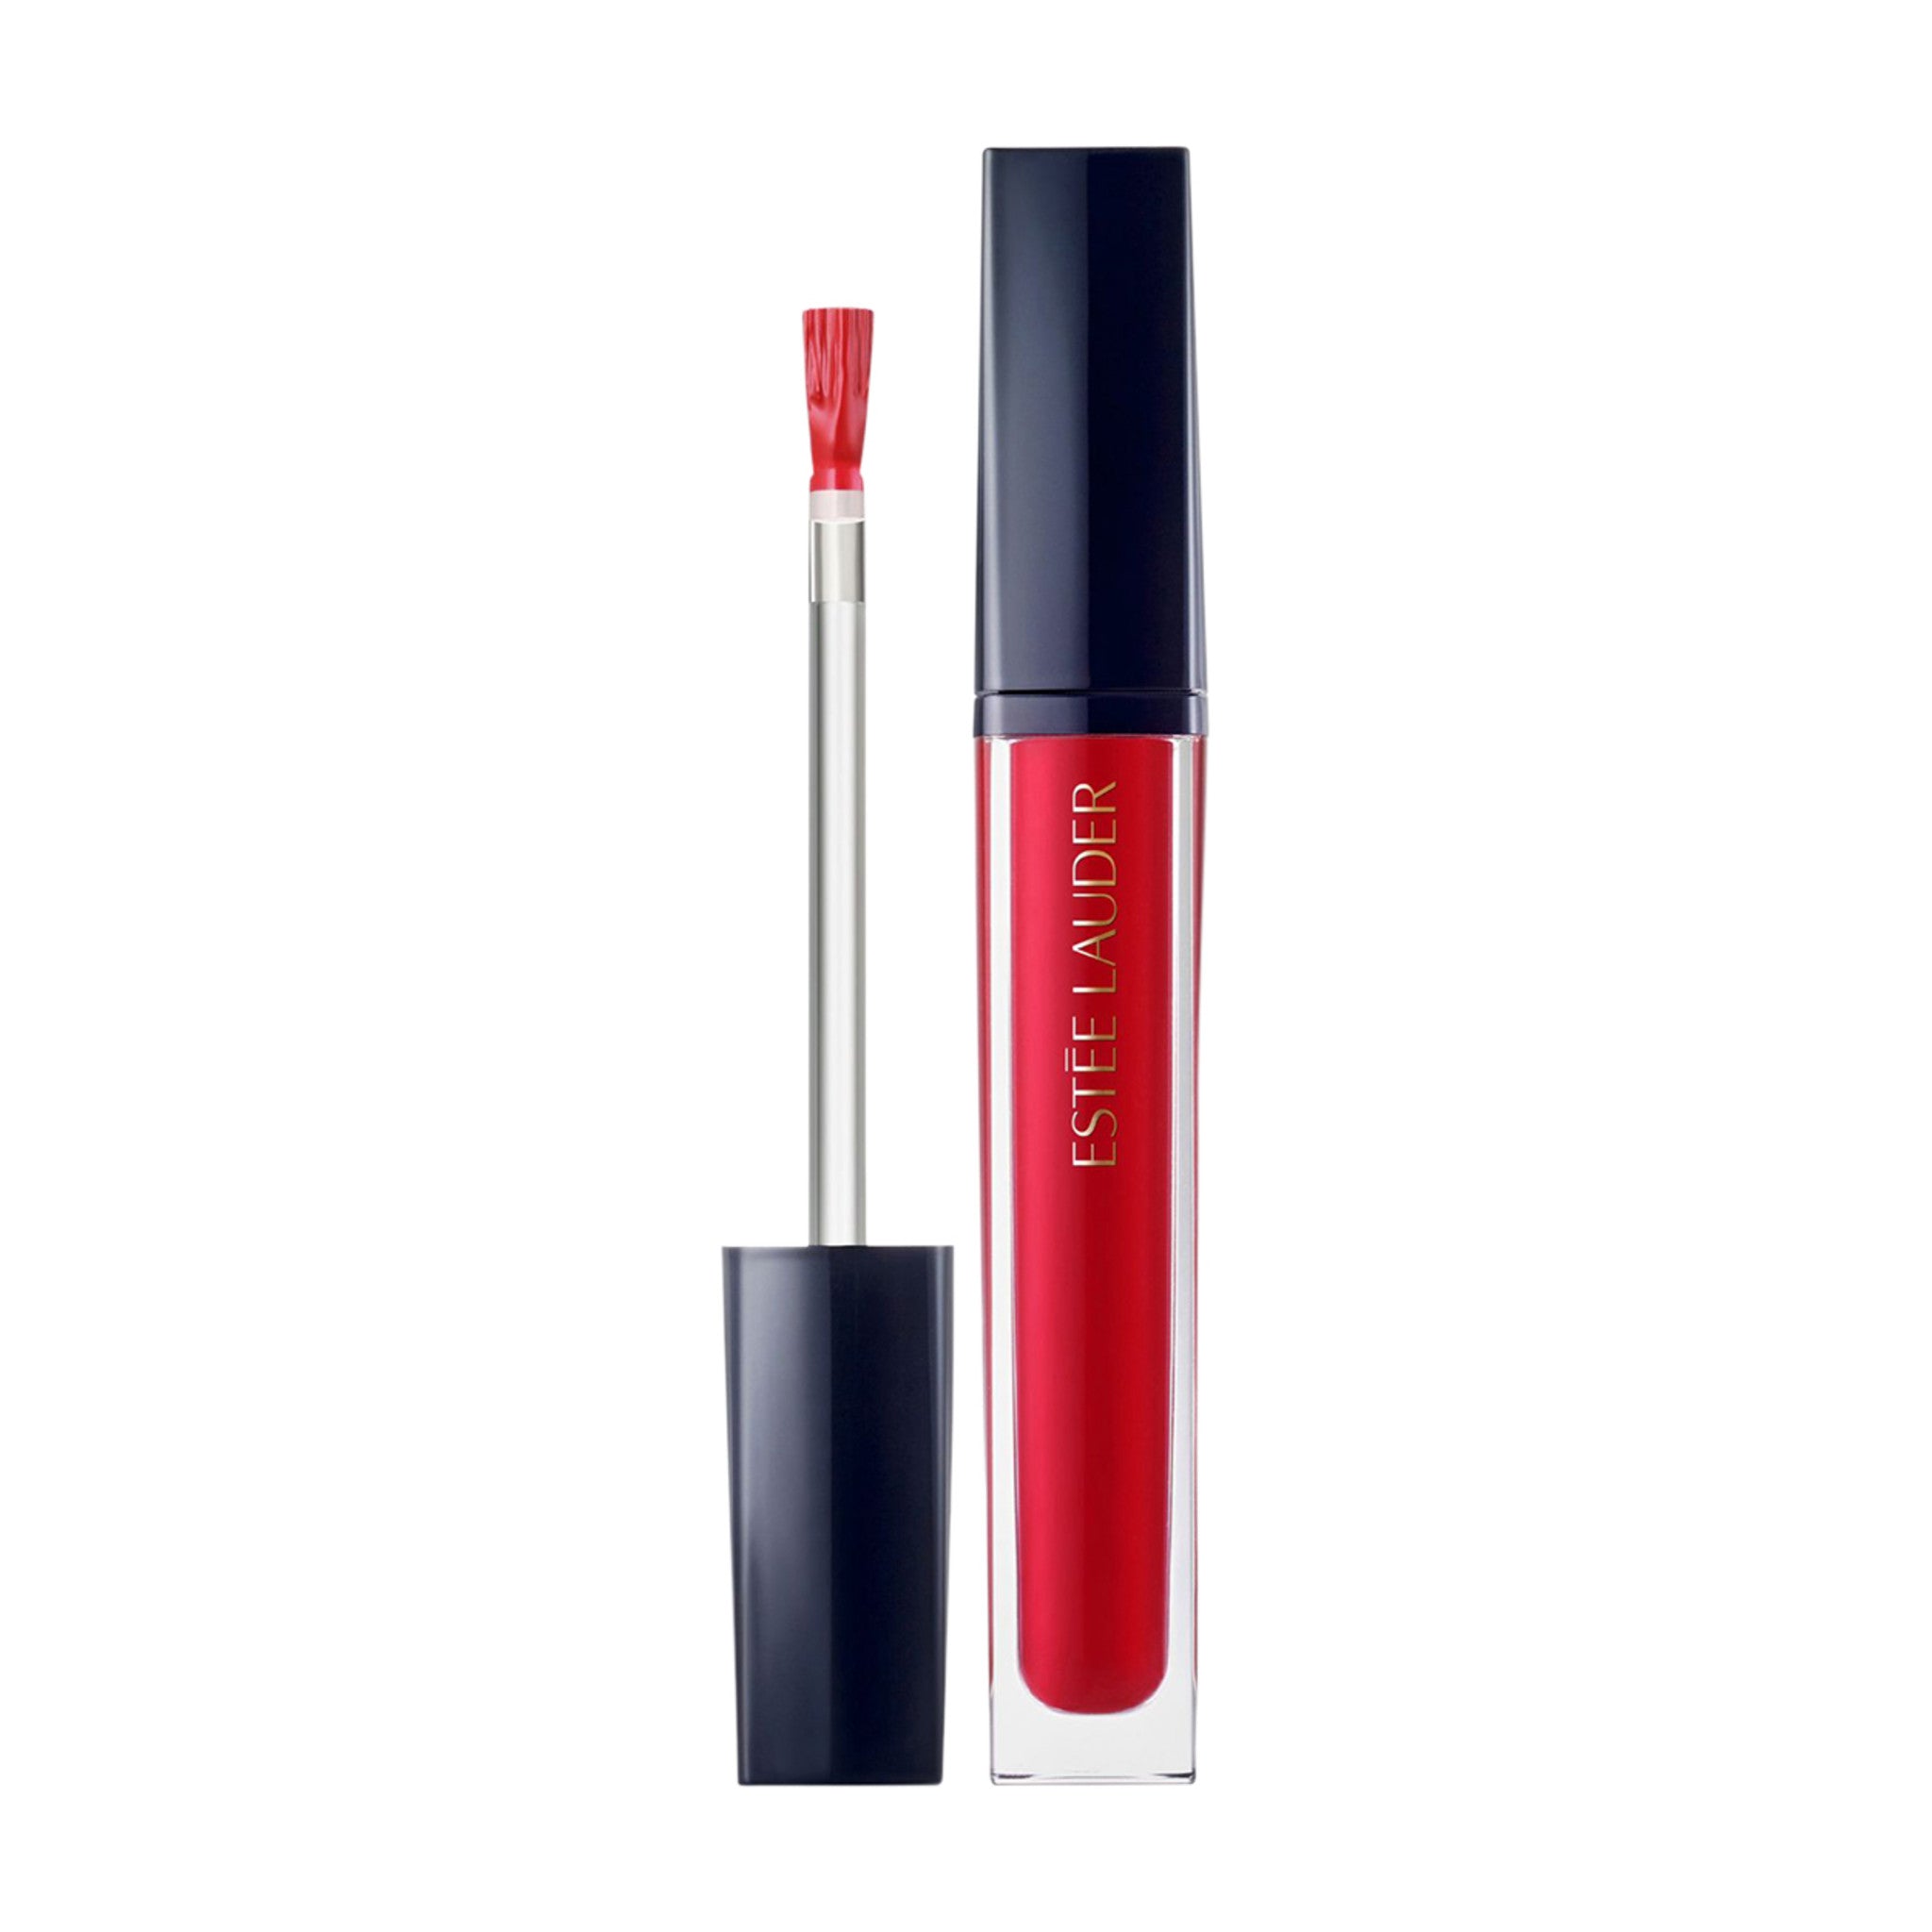 Estée Lauder Pure Color Envy Gloss Kissable Lip Shine Color/Shade variant: Tender Trap main image. This product is in the color red